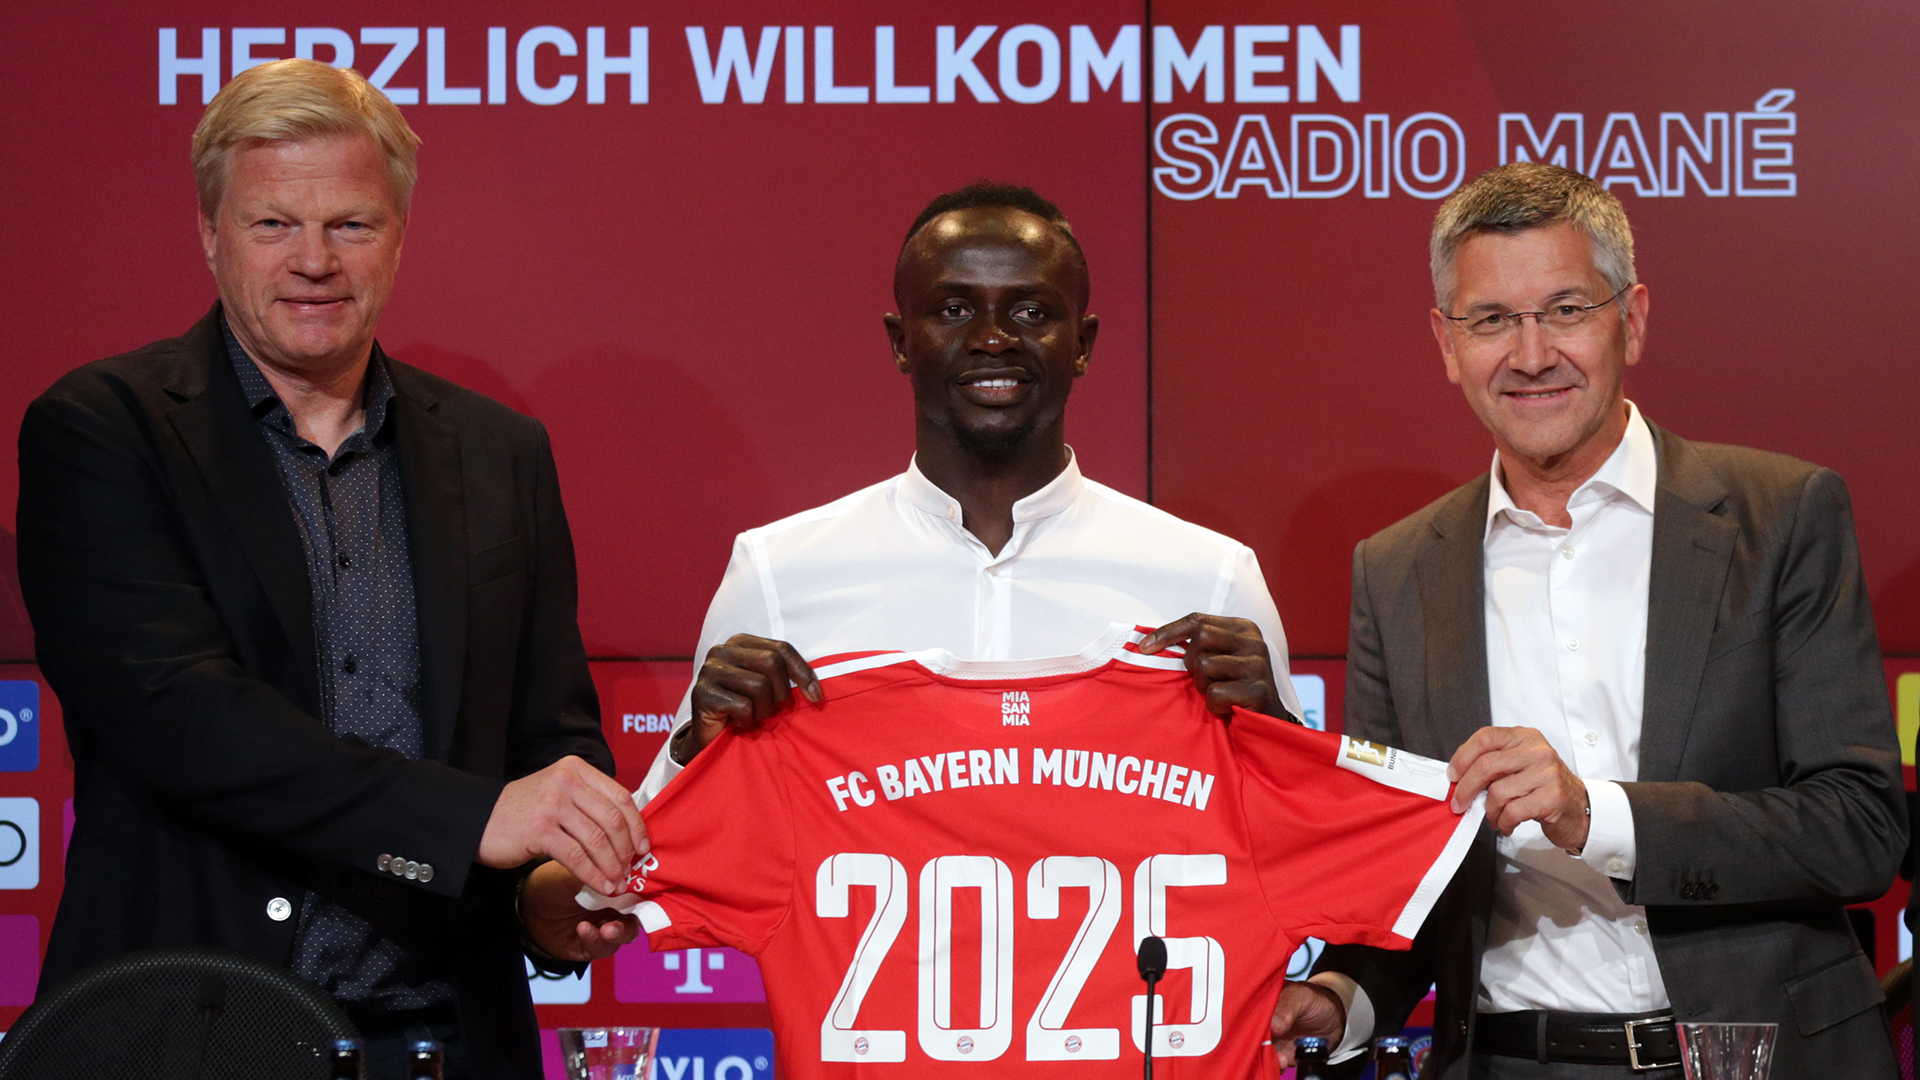 Sadio Mane (C) is presented as new player of FC Bayern Munchen by members of the board Oliver Kahn (L) and Herbert Hainer (R) at Allianz Arena on June 22, 2022 in Munich, Germany.